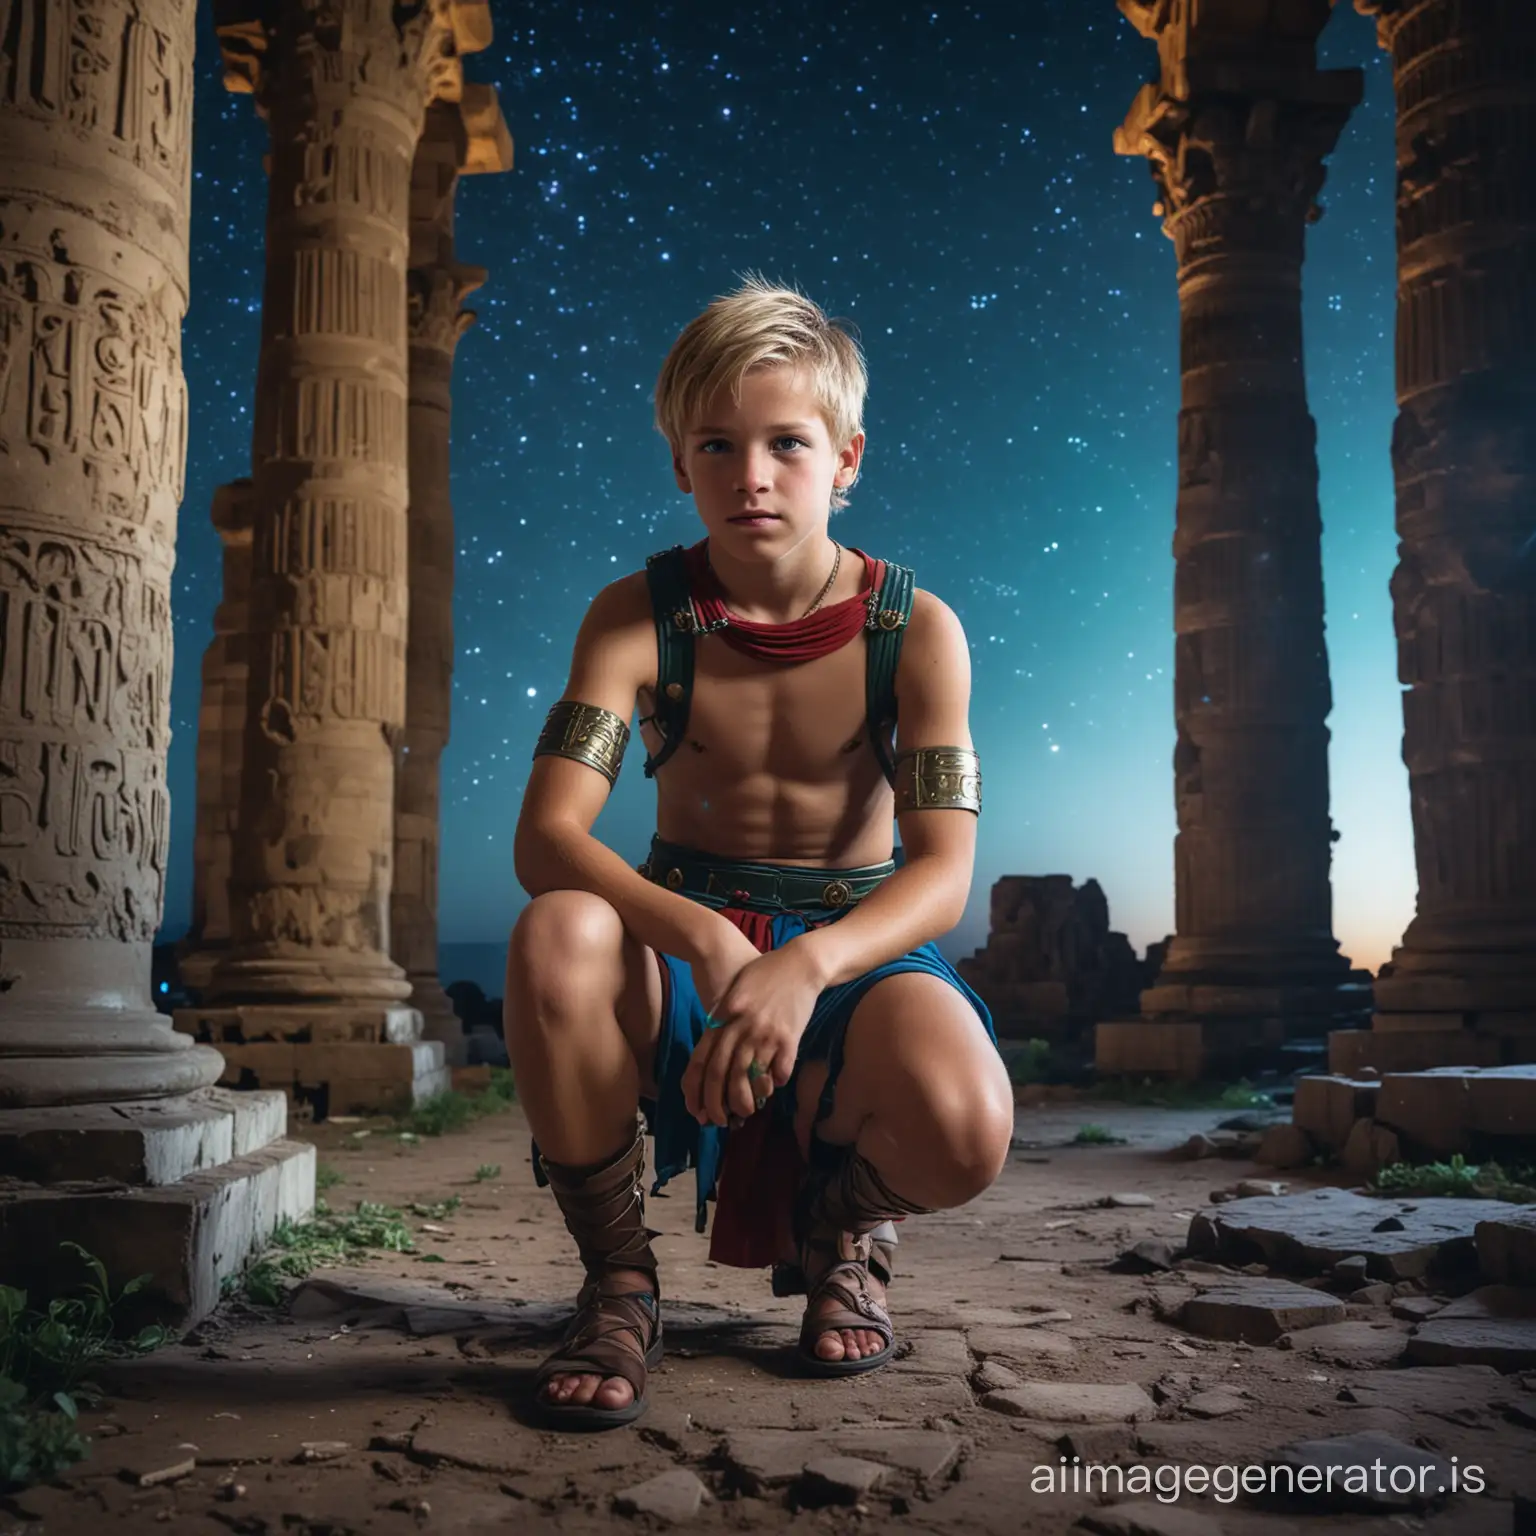 Roman-Soldier-Boy-Crouching-in-Neonlit-Egyptian-Temple-Ruins-at-Night